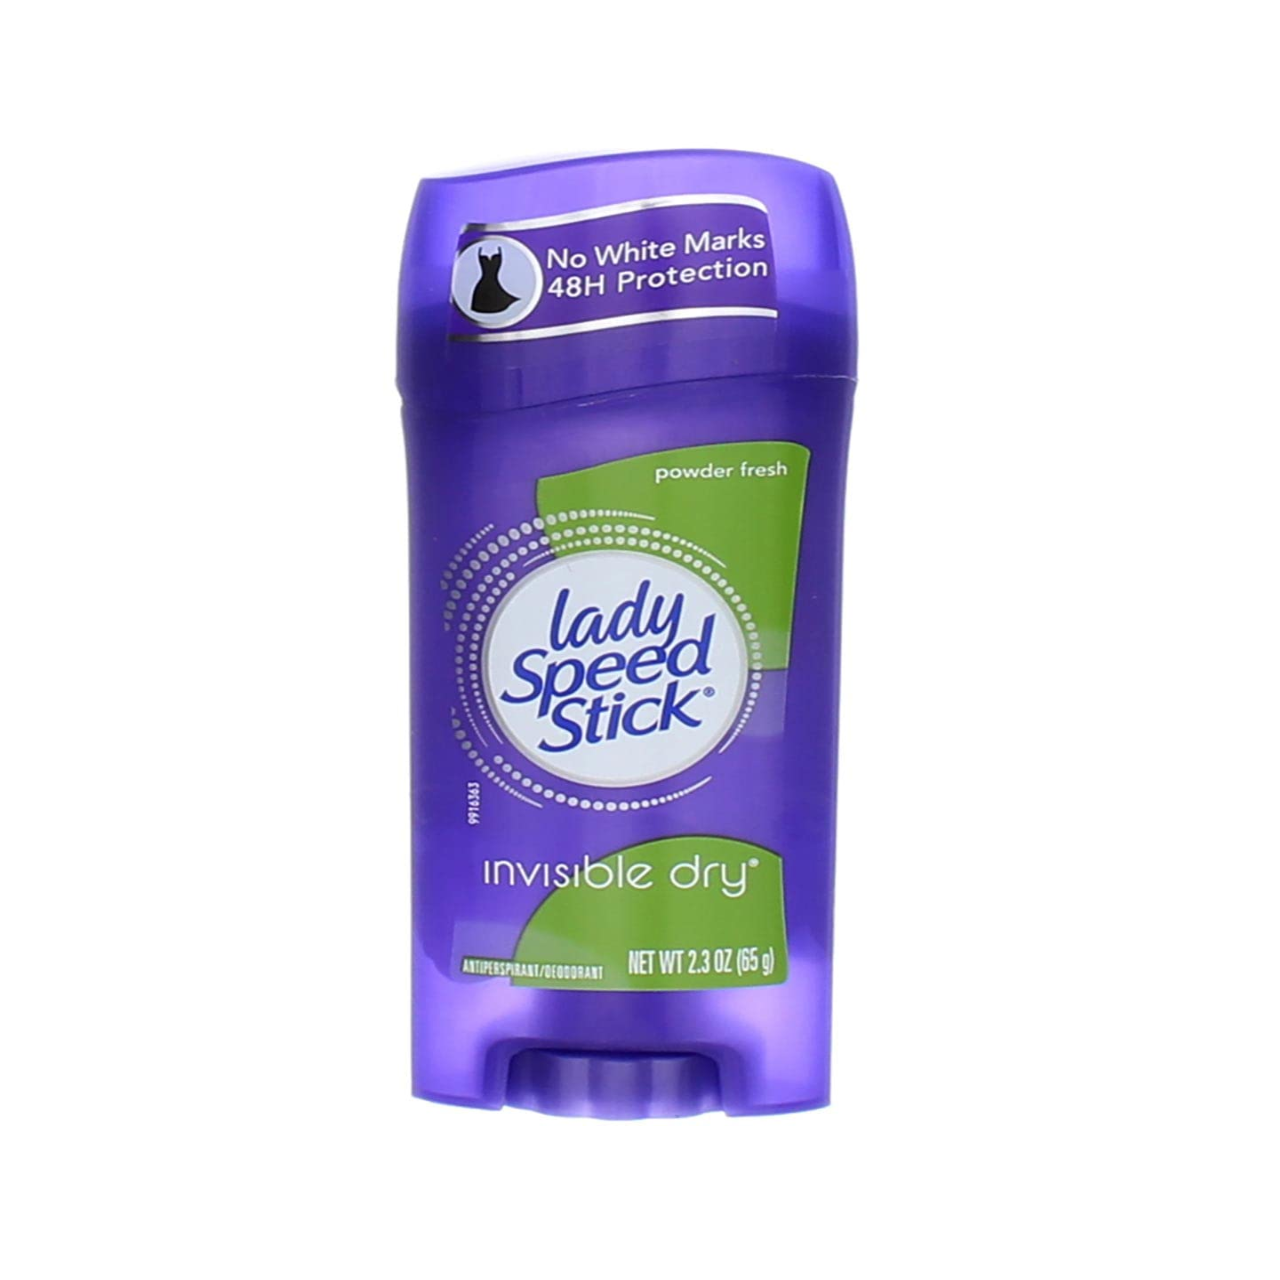 Lady Speed Stick Invisible Dry Powder Fresh (Each)